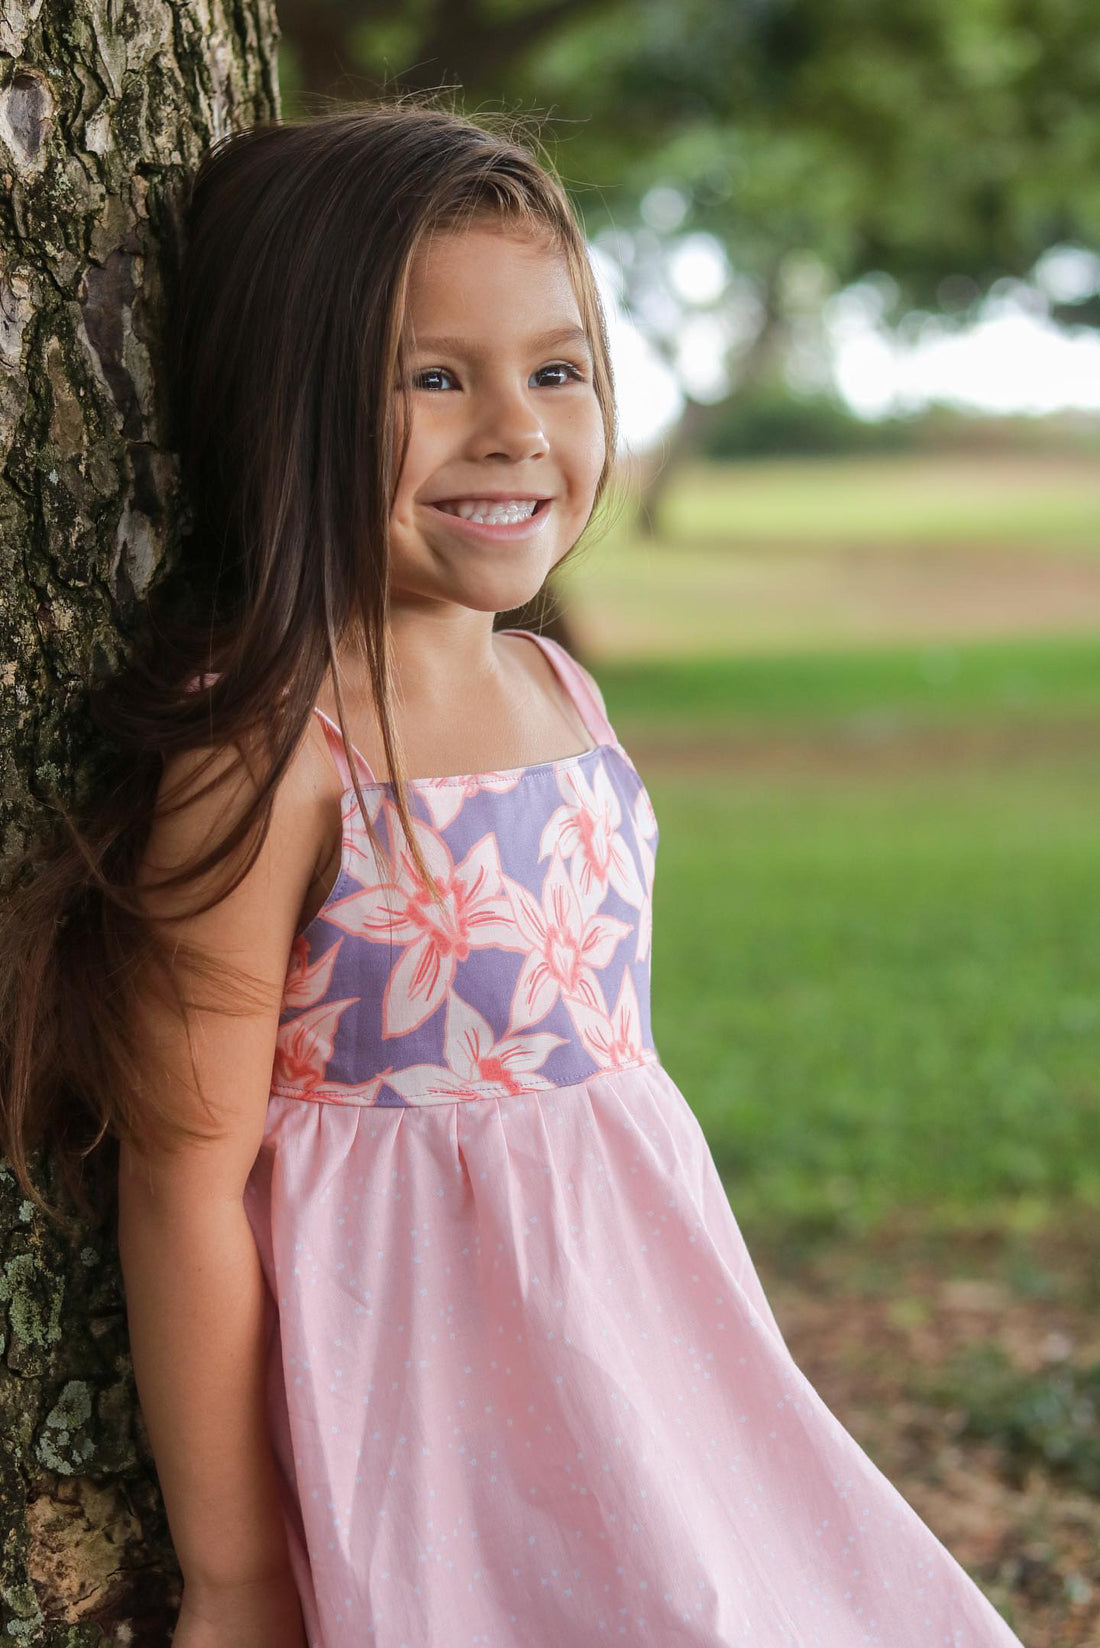 Girls Dress - Orchid Print  - Toddler Dress - Baby Girl Dress - Twirly Dress with Adjustable Straps-  Made in Maui, Hawaii